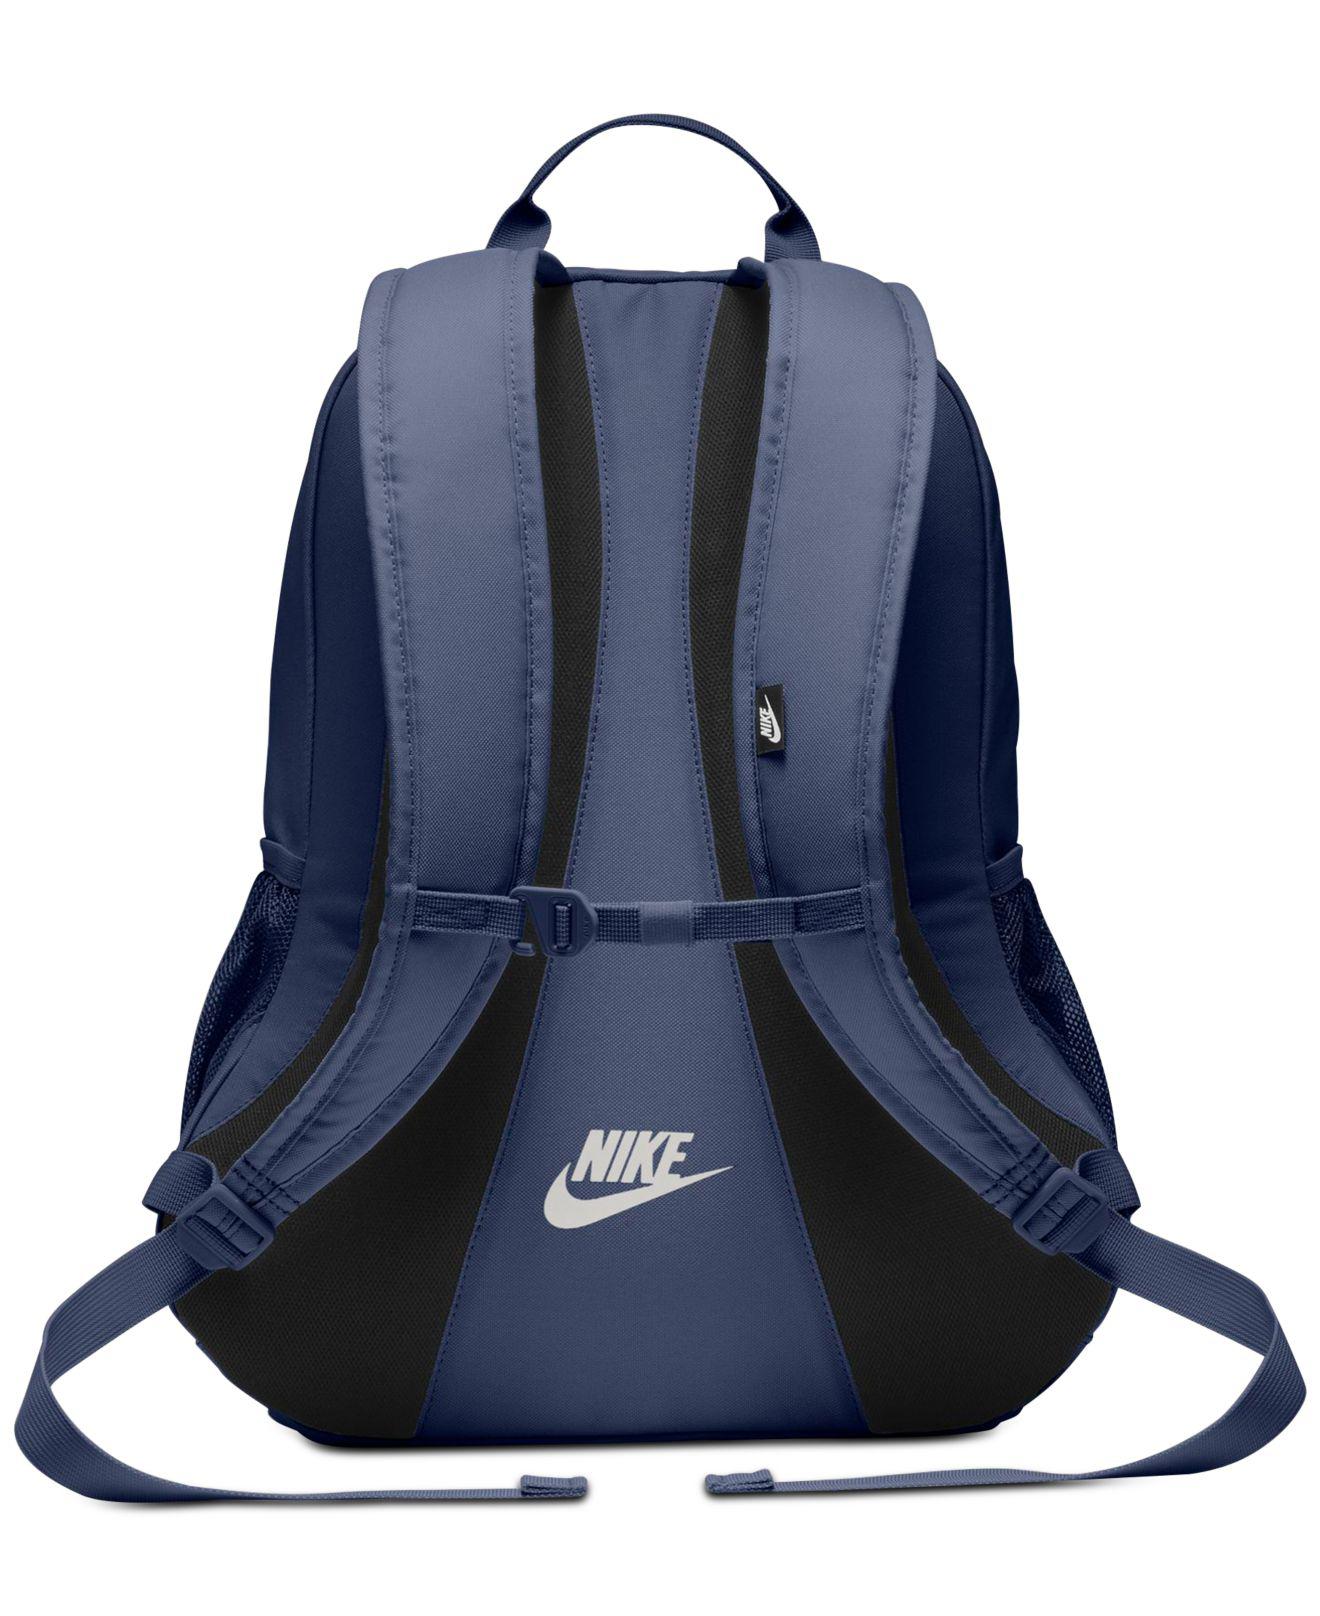 Nike Synthetic Hayward Futura 2.0 Backpack in Blue - Lyst